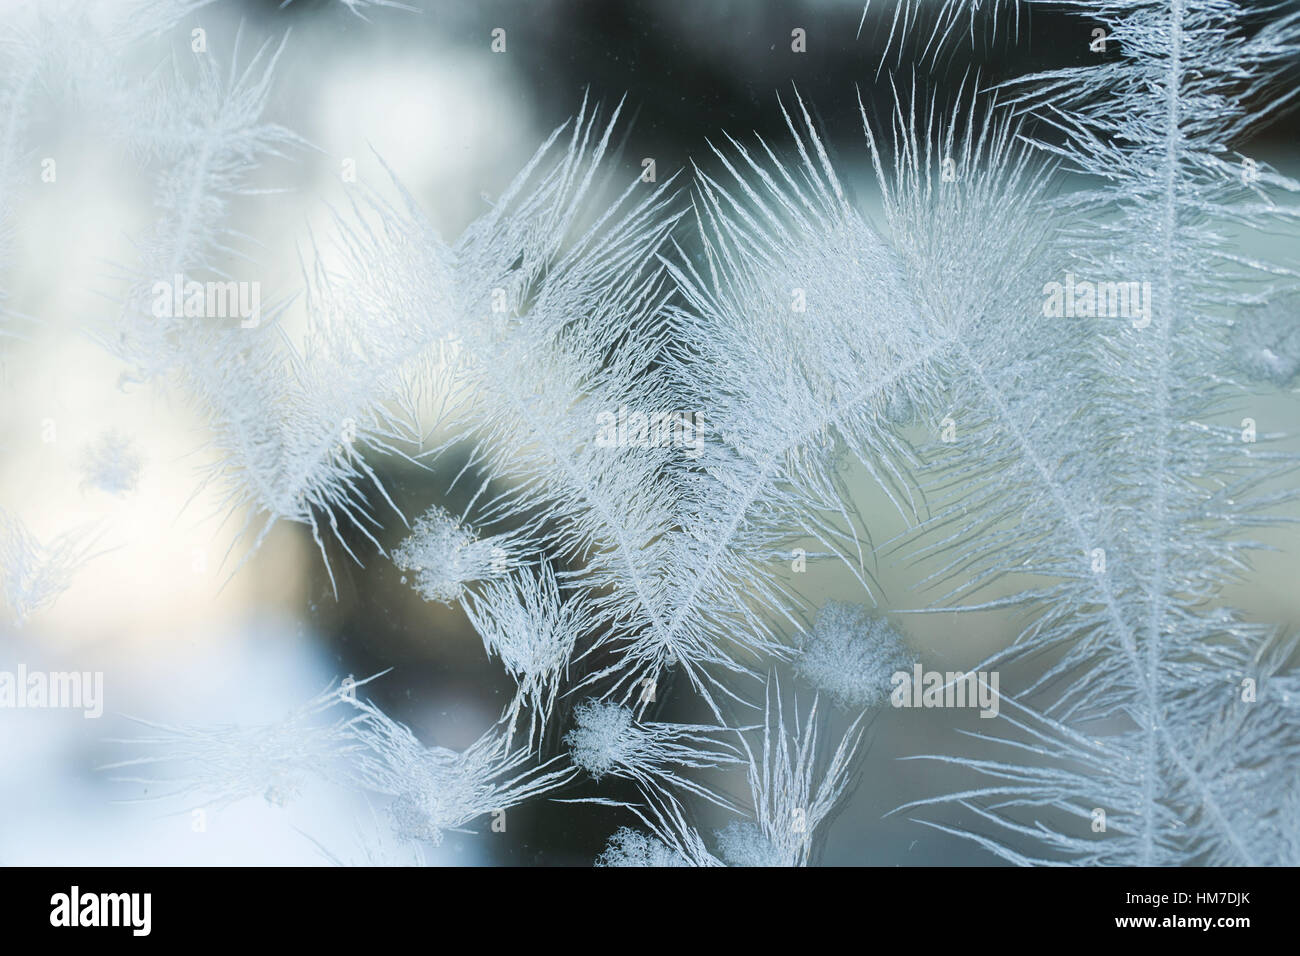 abstract,beautiful,beauty,bokeh,bright,christmas,cold,cool,details,fancy,Fantasie,fantasy,frost,frosty,Hell,icy,imagination,light,macro,nature,ornament,SchÃ¶nheit,seasonal,textured,weather,white,winter Stock Photo